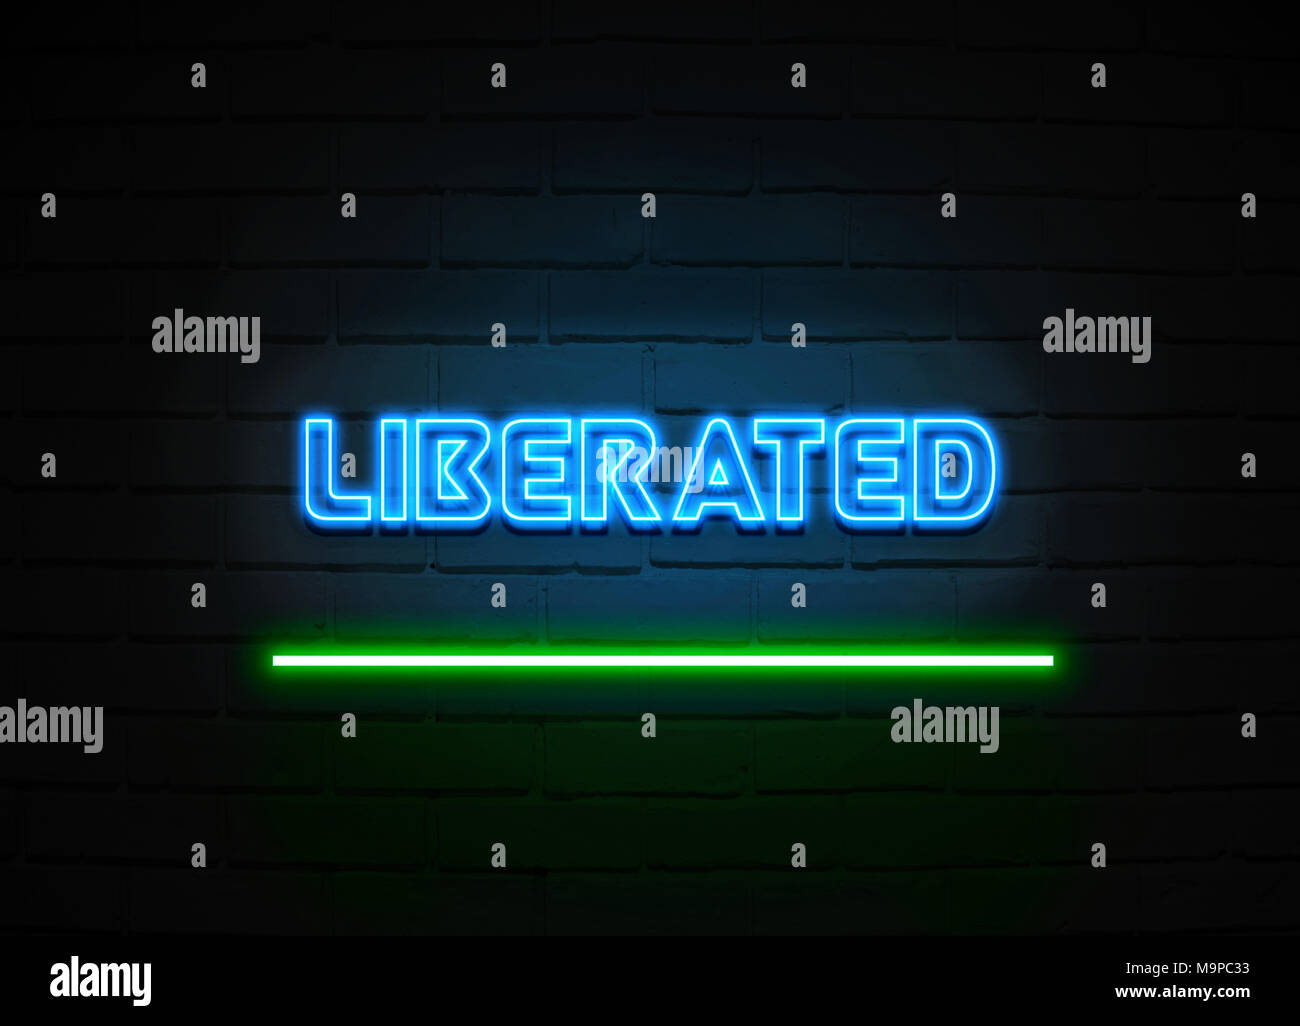 Liberated neon sign - Glowing Neon Sign on brickwall wall - 3D rendered royalty free stock illustration. Stock Photo